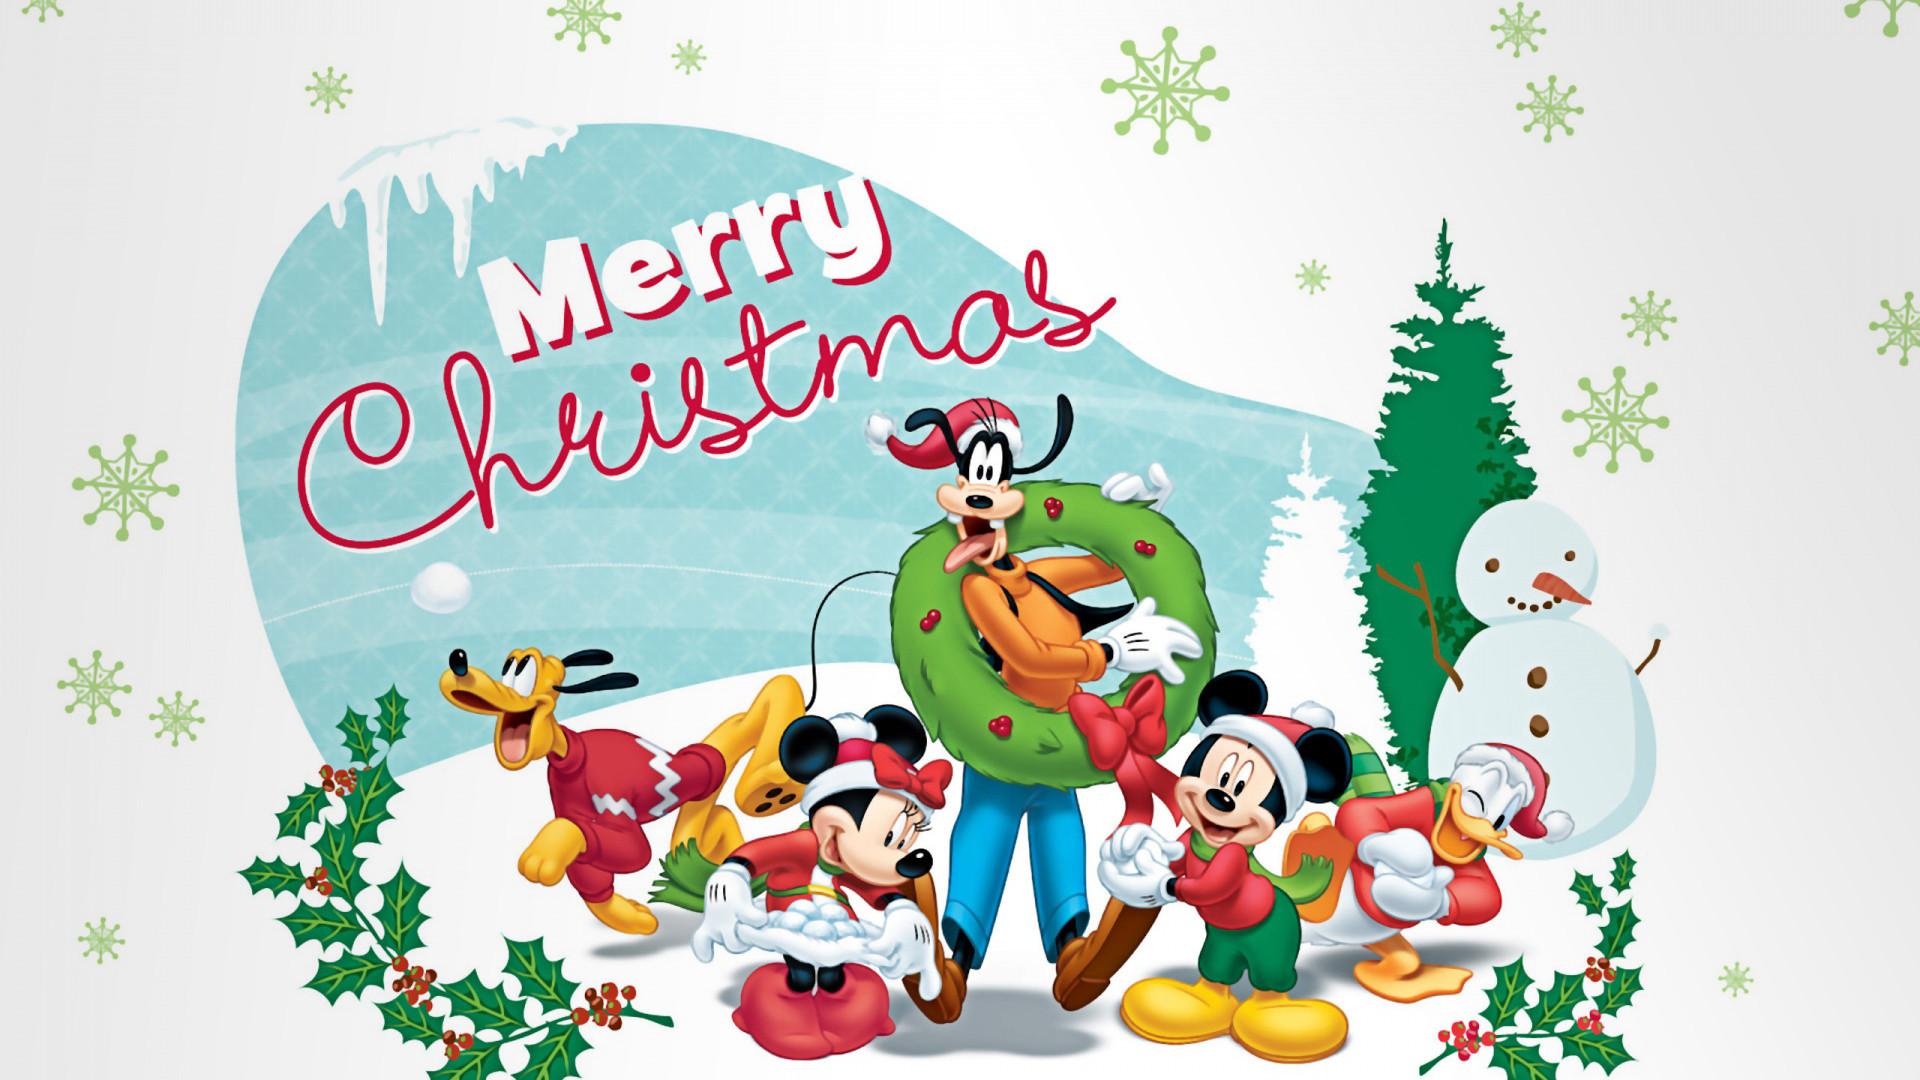 Disney Christmas Wallpaper background picture